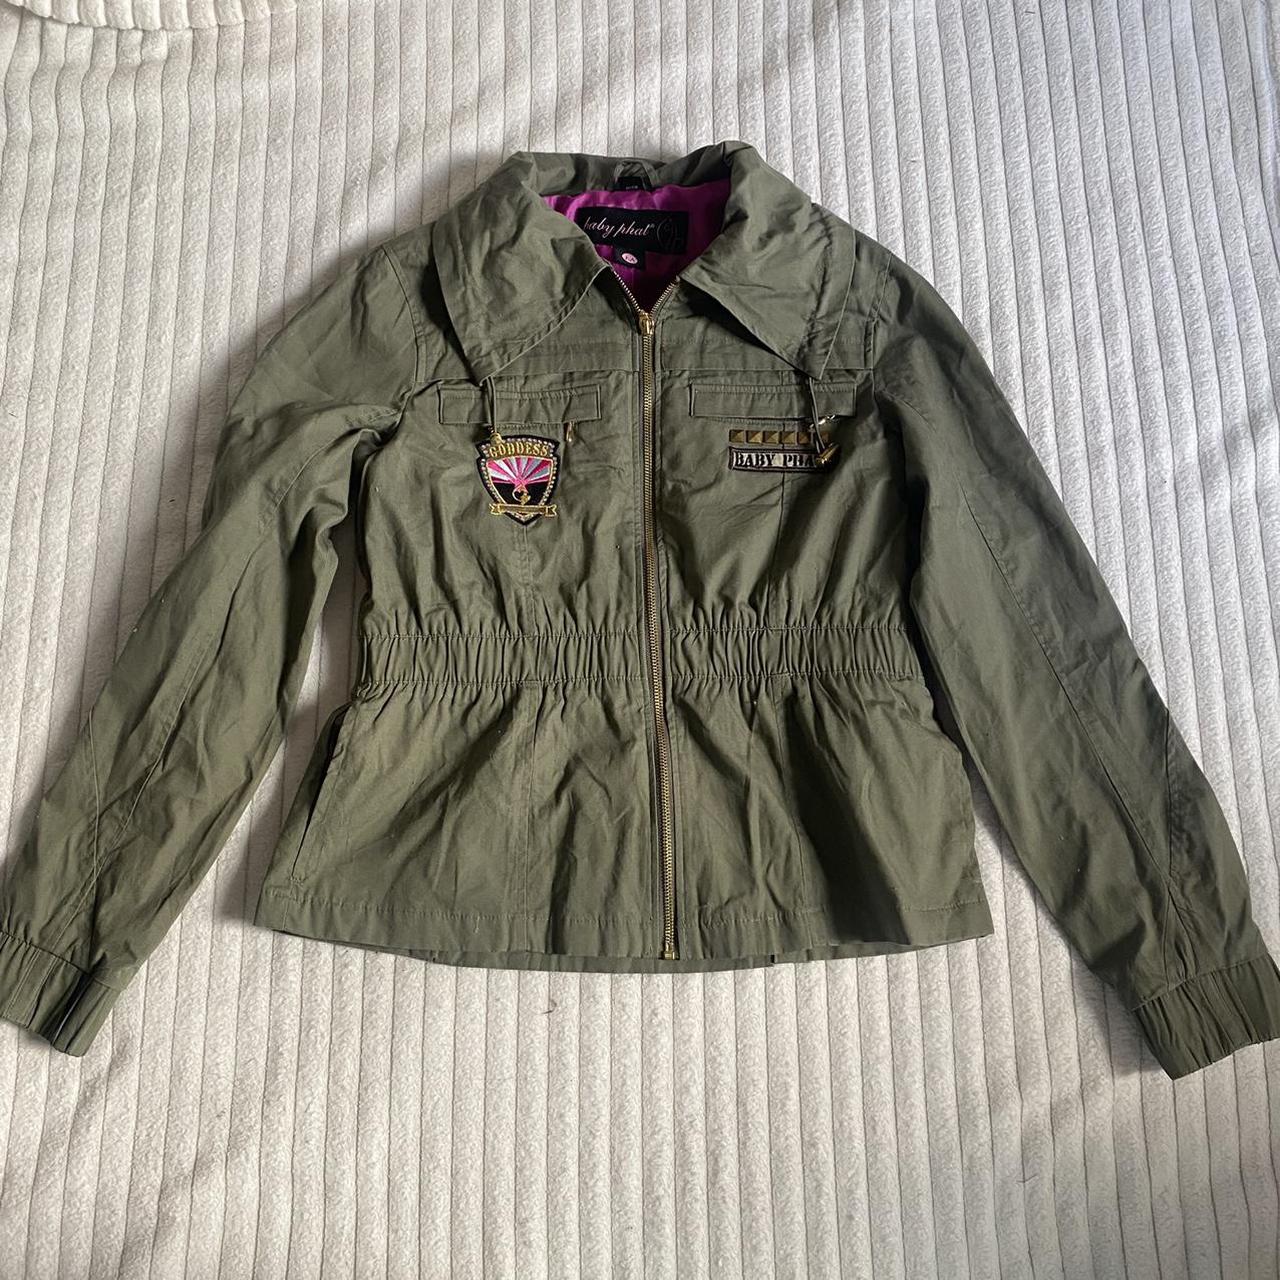 This amazing baby phat military jacket! 💚 I have... - Depop